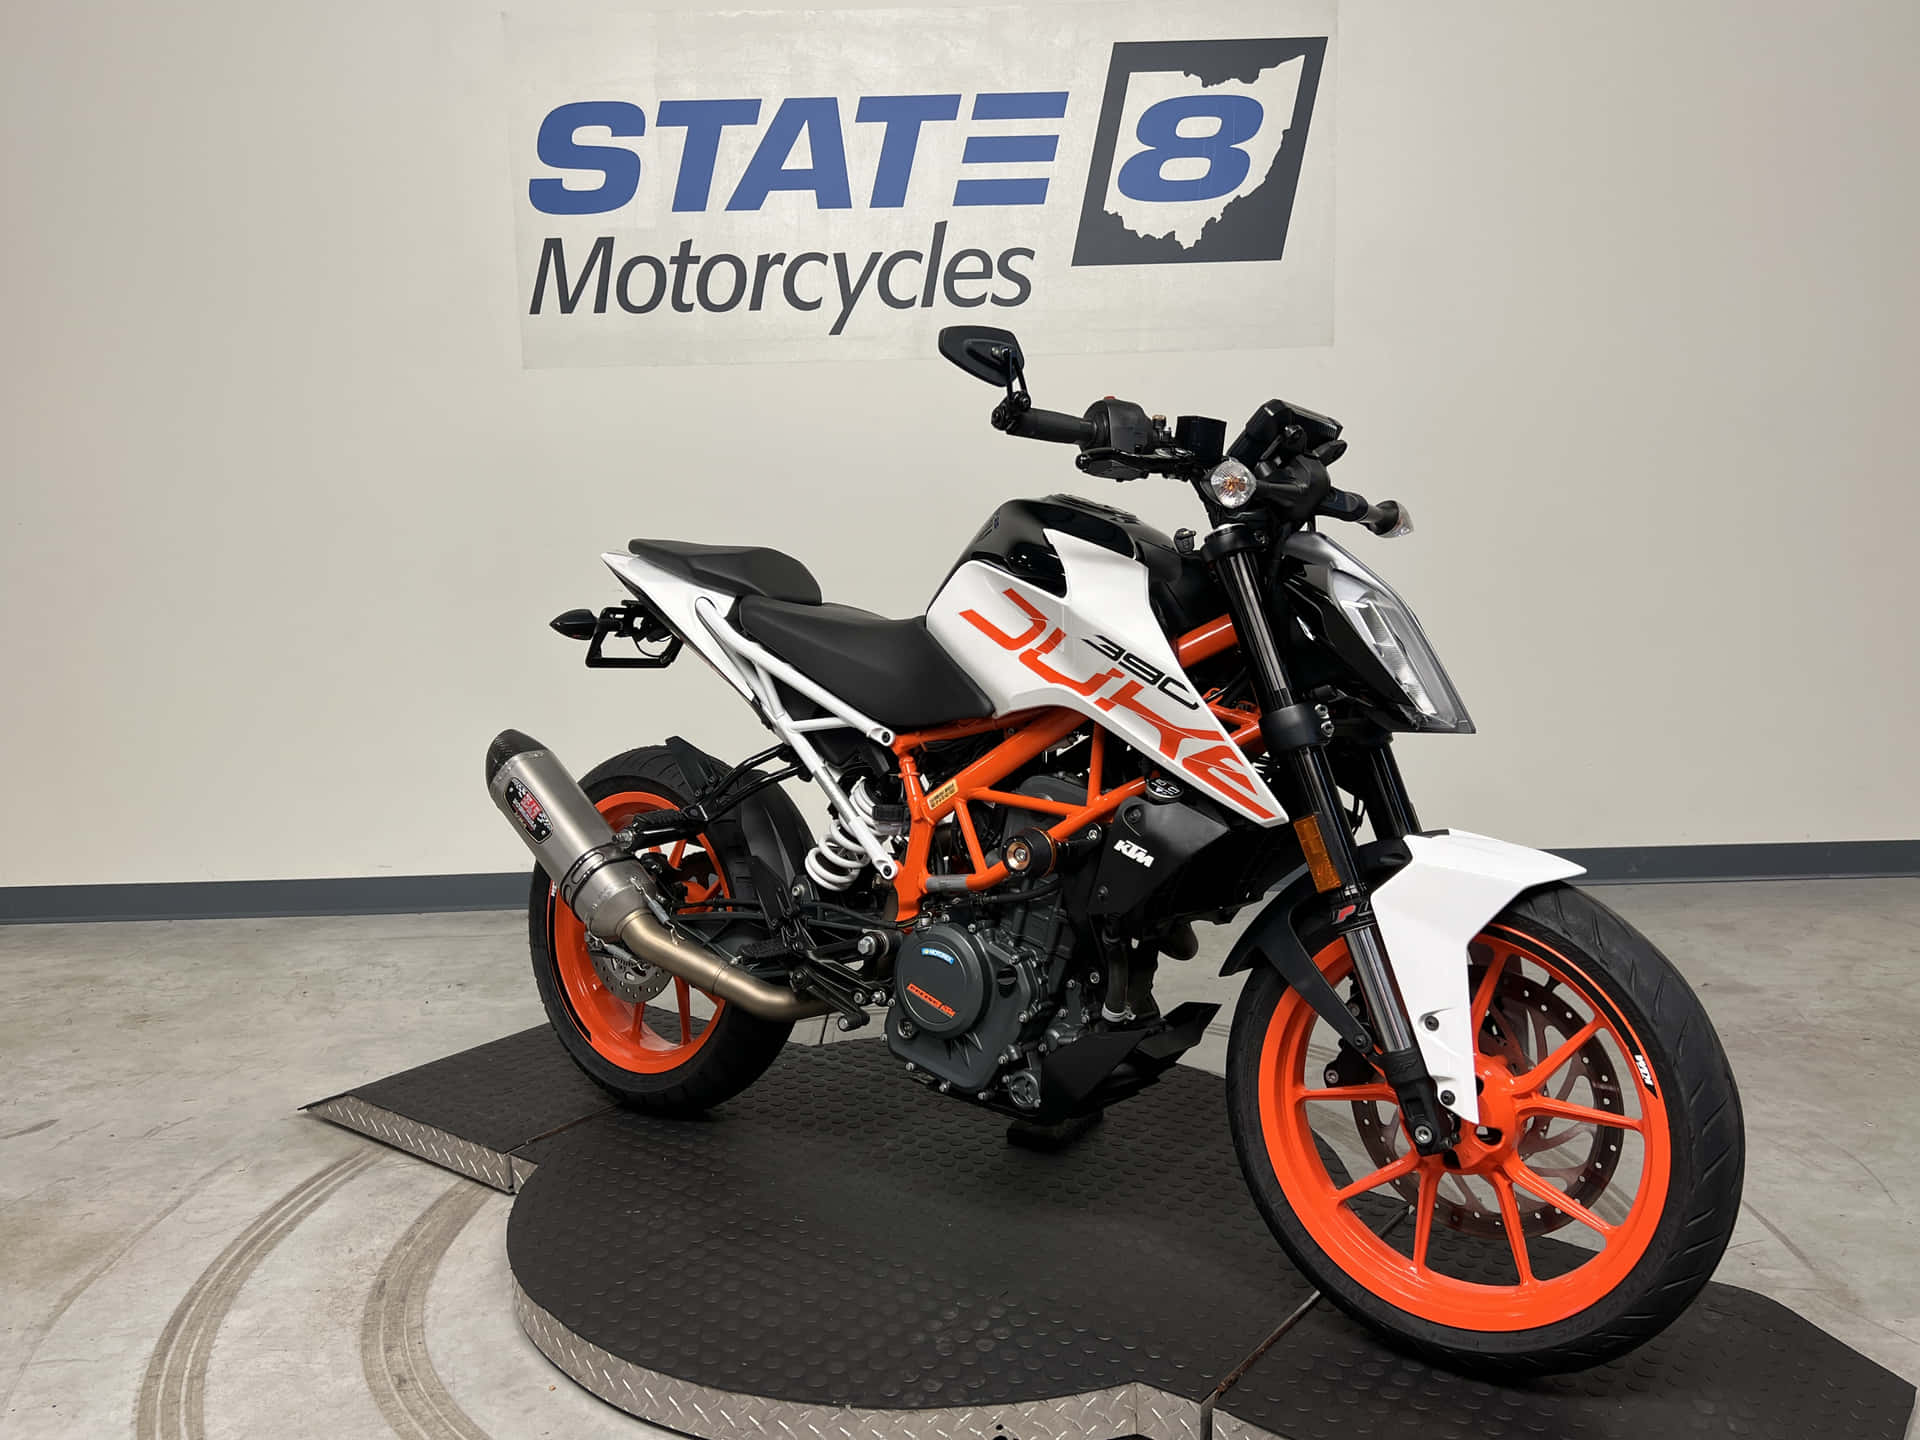 Ktm Duke 390 In State 8 Motorcycles Sign Picture